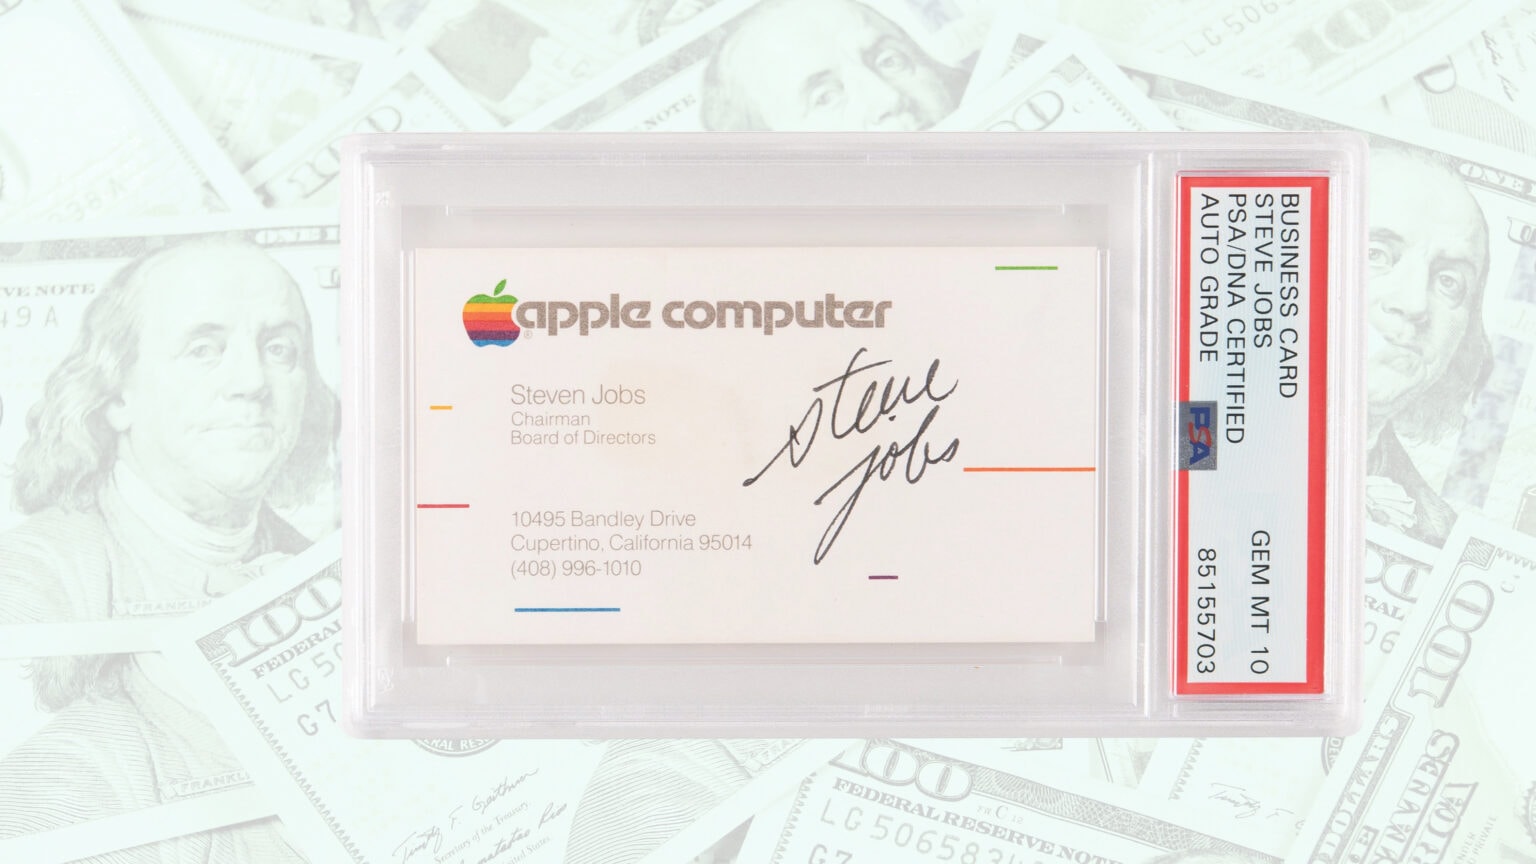 Would you pay $180,000 for Steve Jobs' business card?